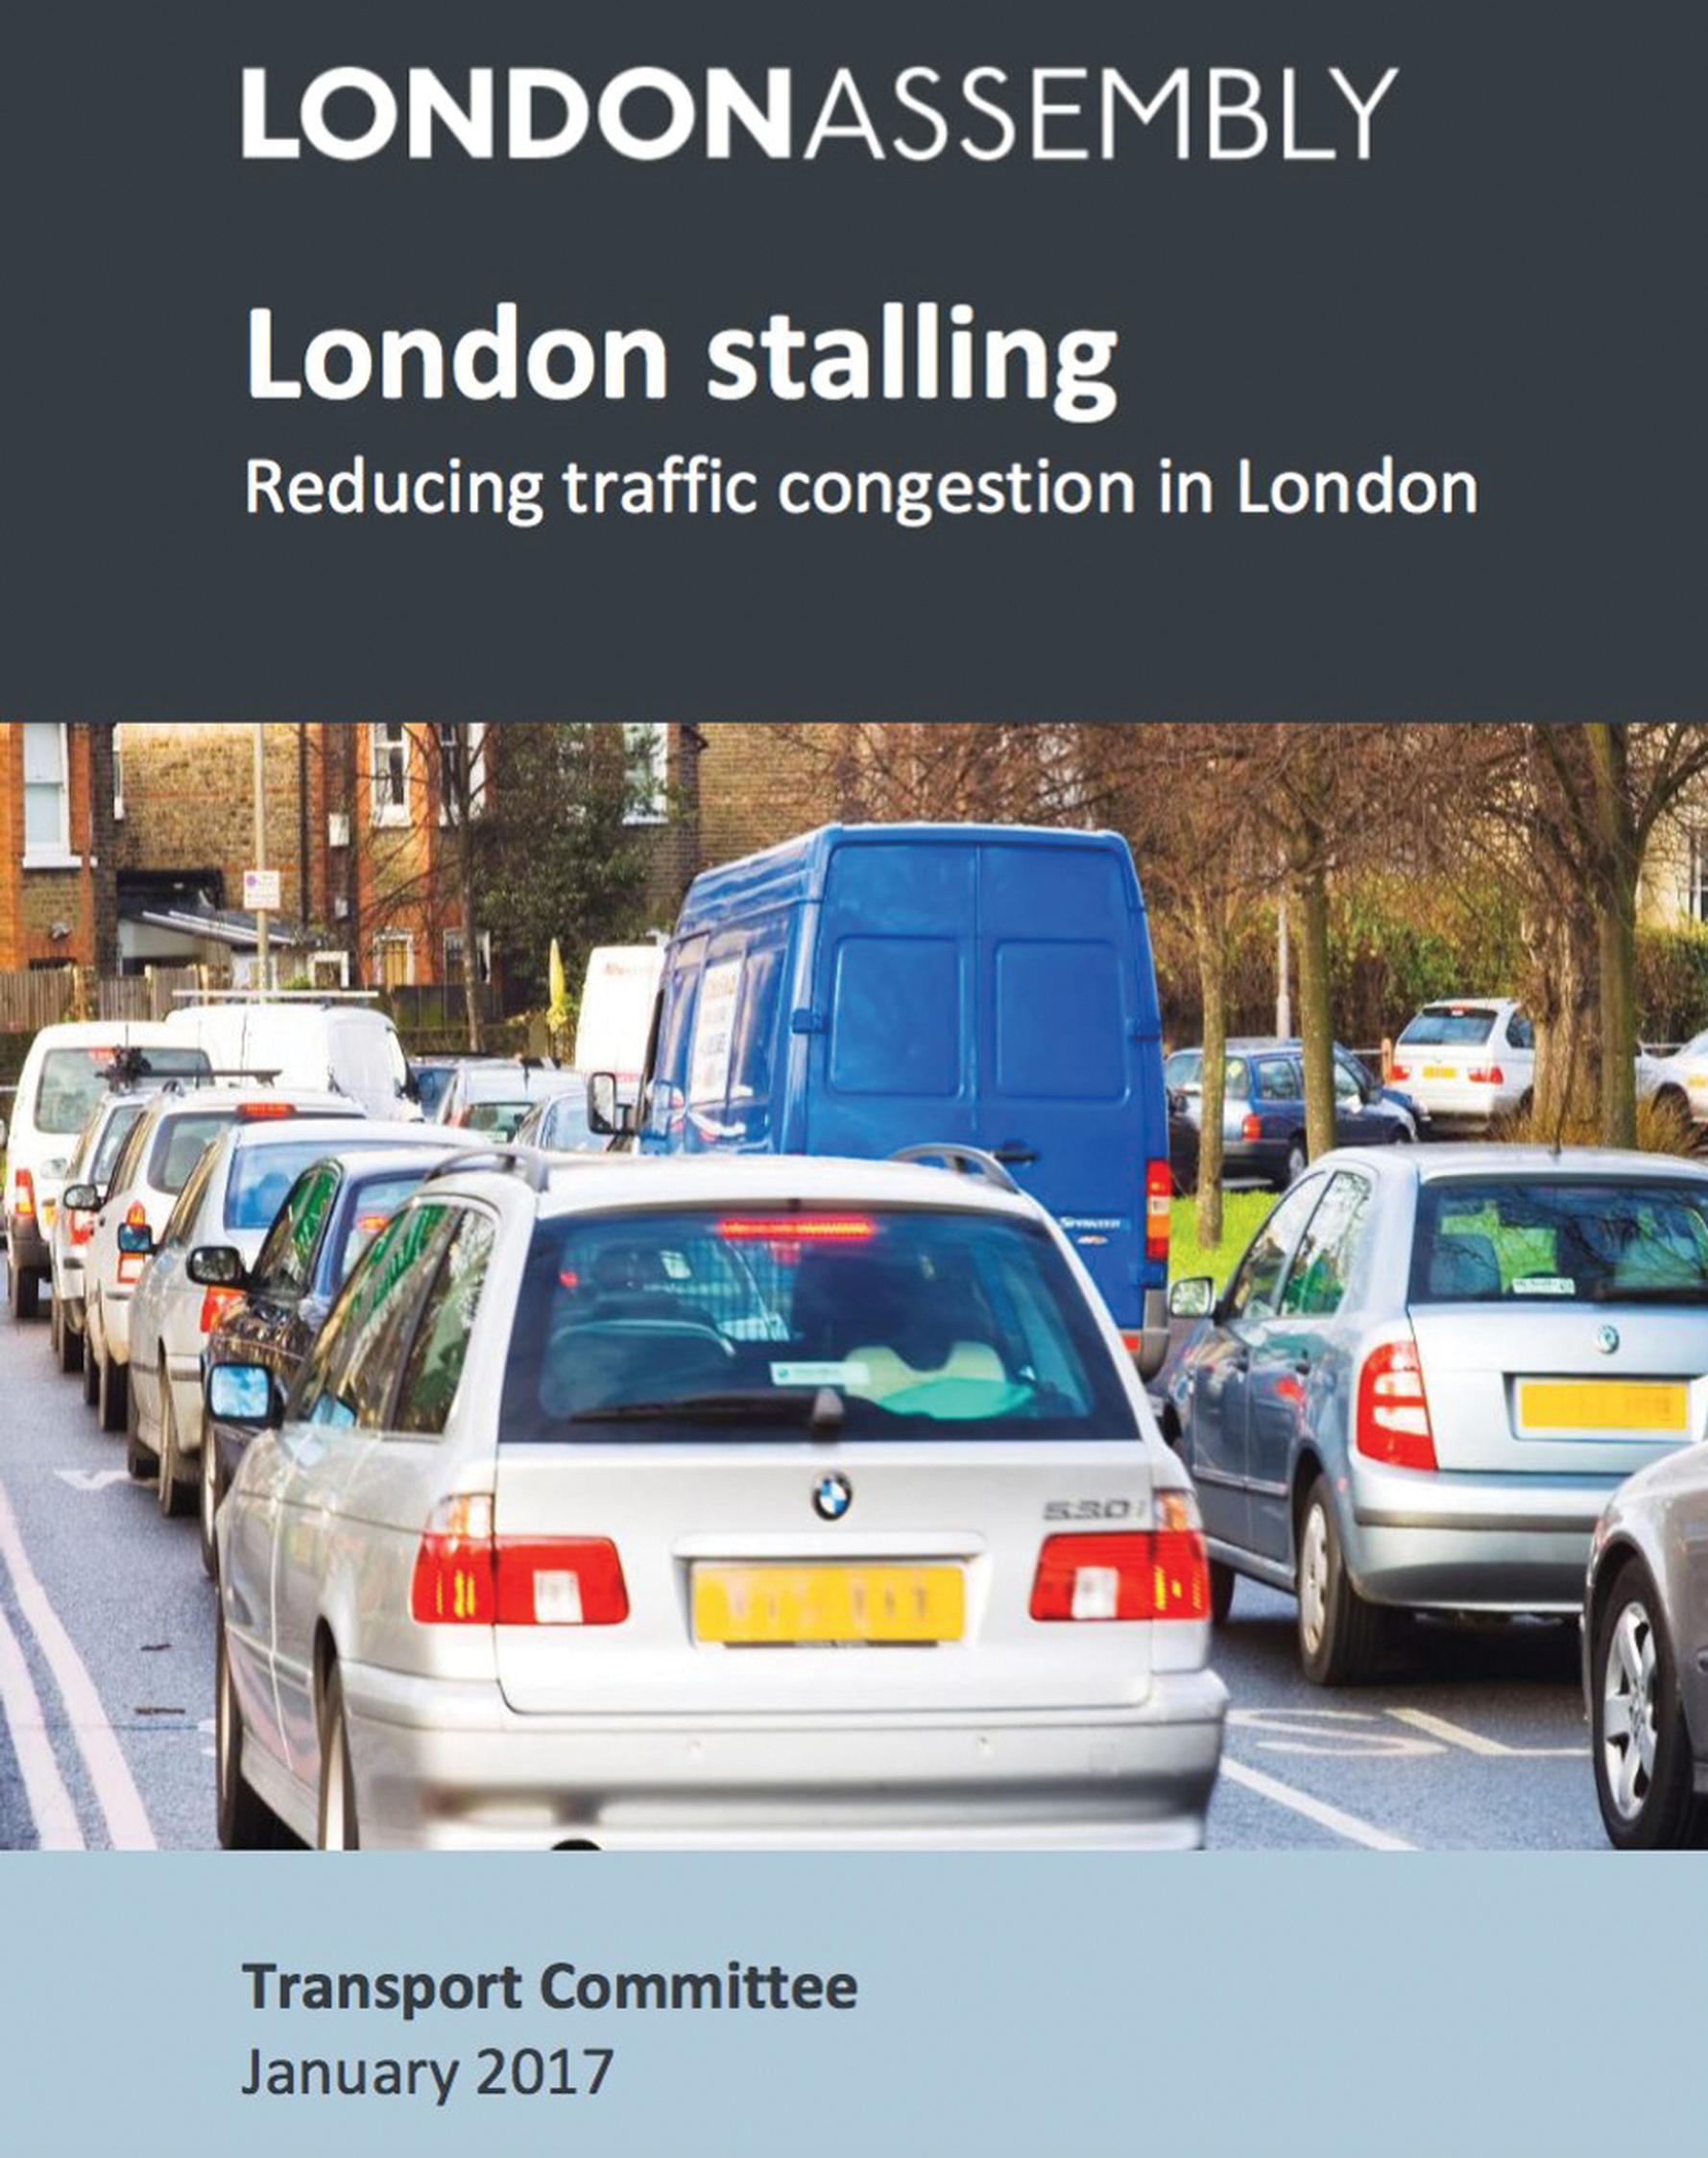 Commentators from left and right both backed road pricing for London